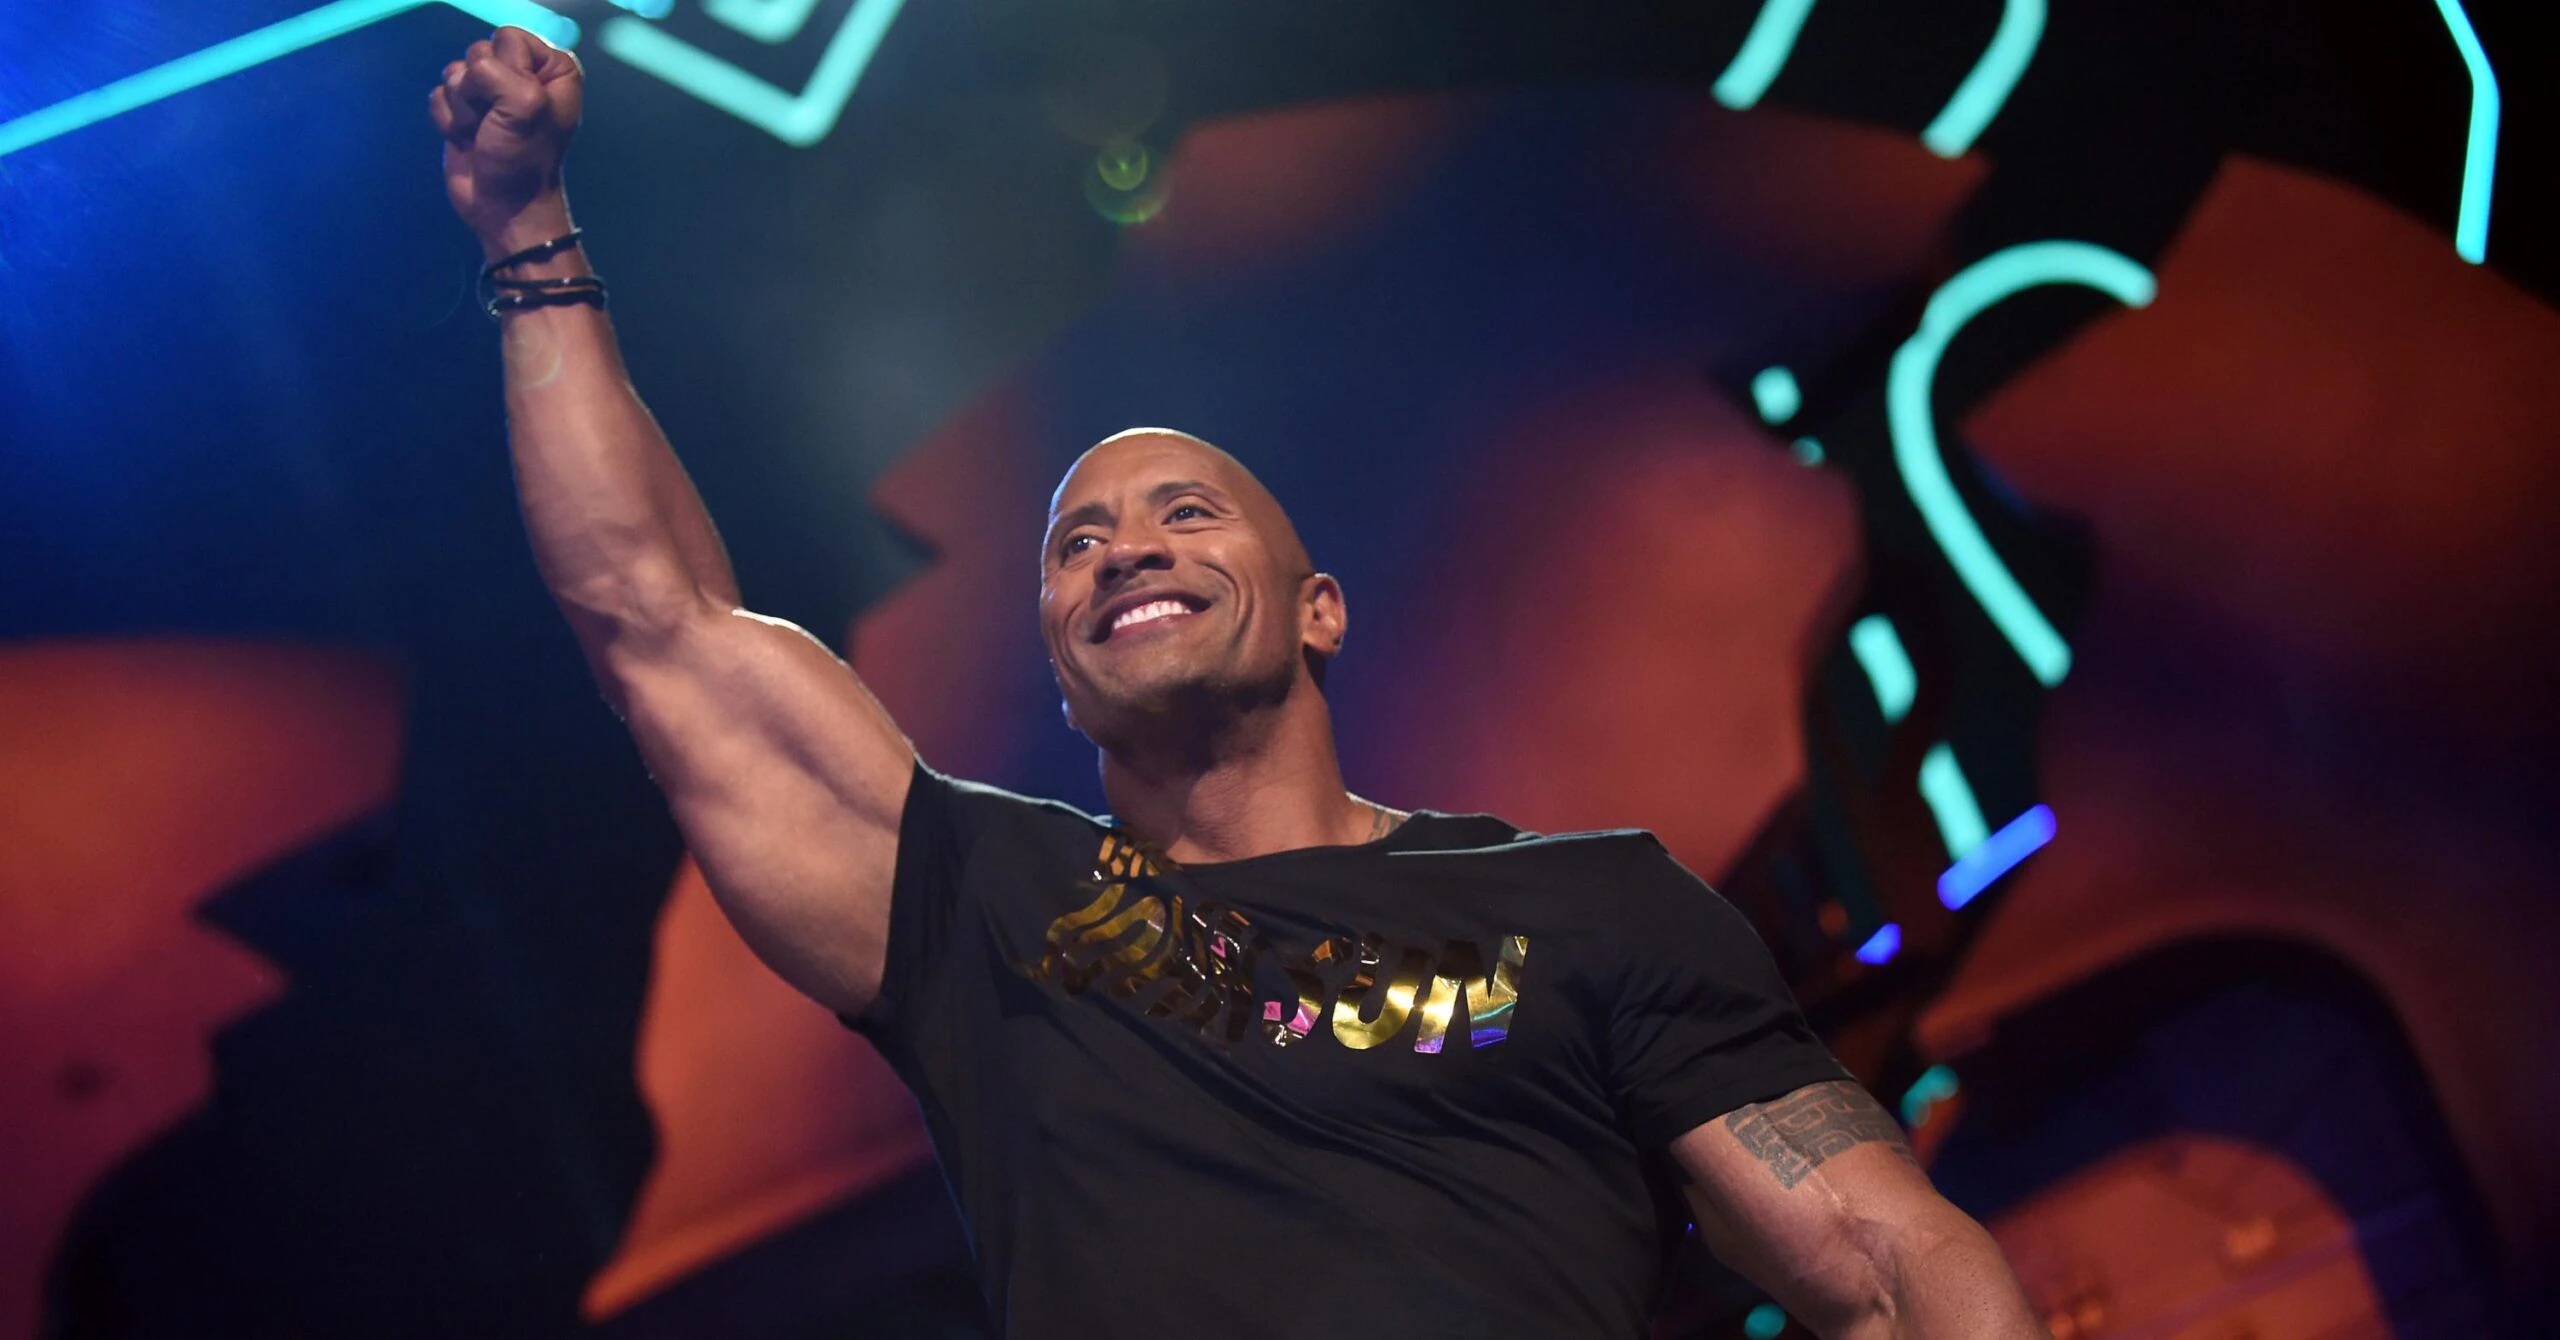 Listen To Dwayne ‘The Rock’ Johnson Slay His First Rap Verse on New Song With TechN9ne